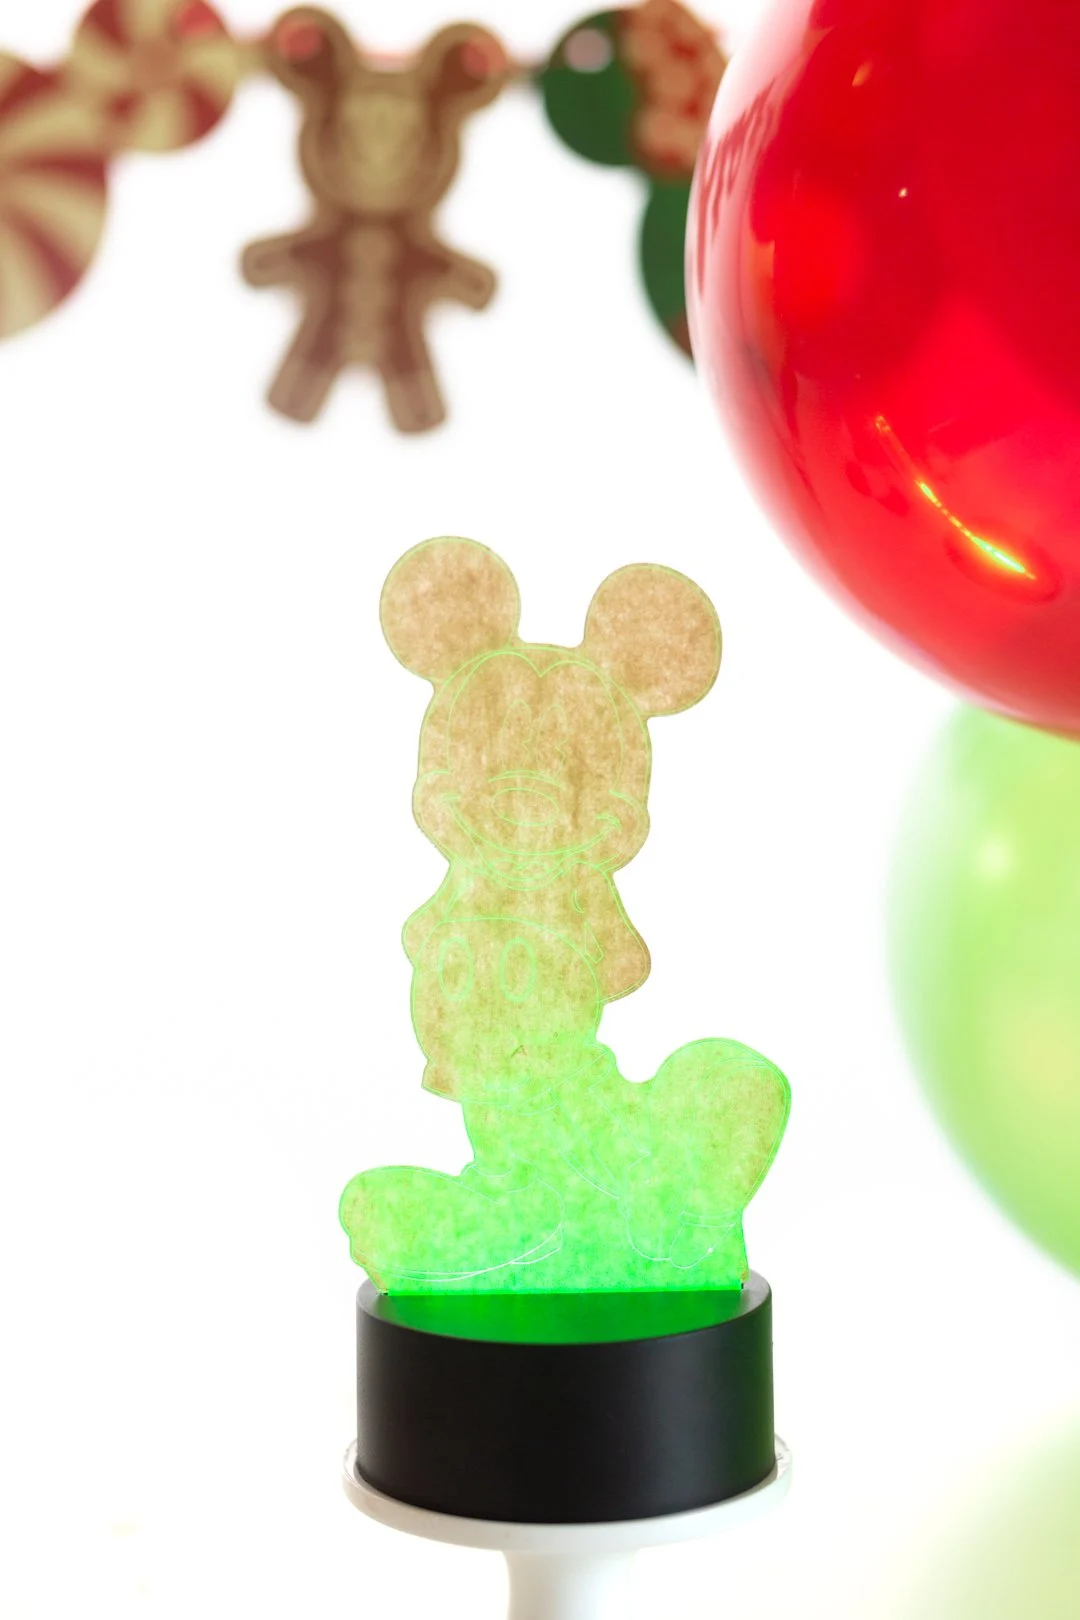 light up LED battery operated Mickey Mouse plaque, lit up in the color green.